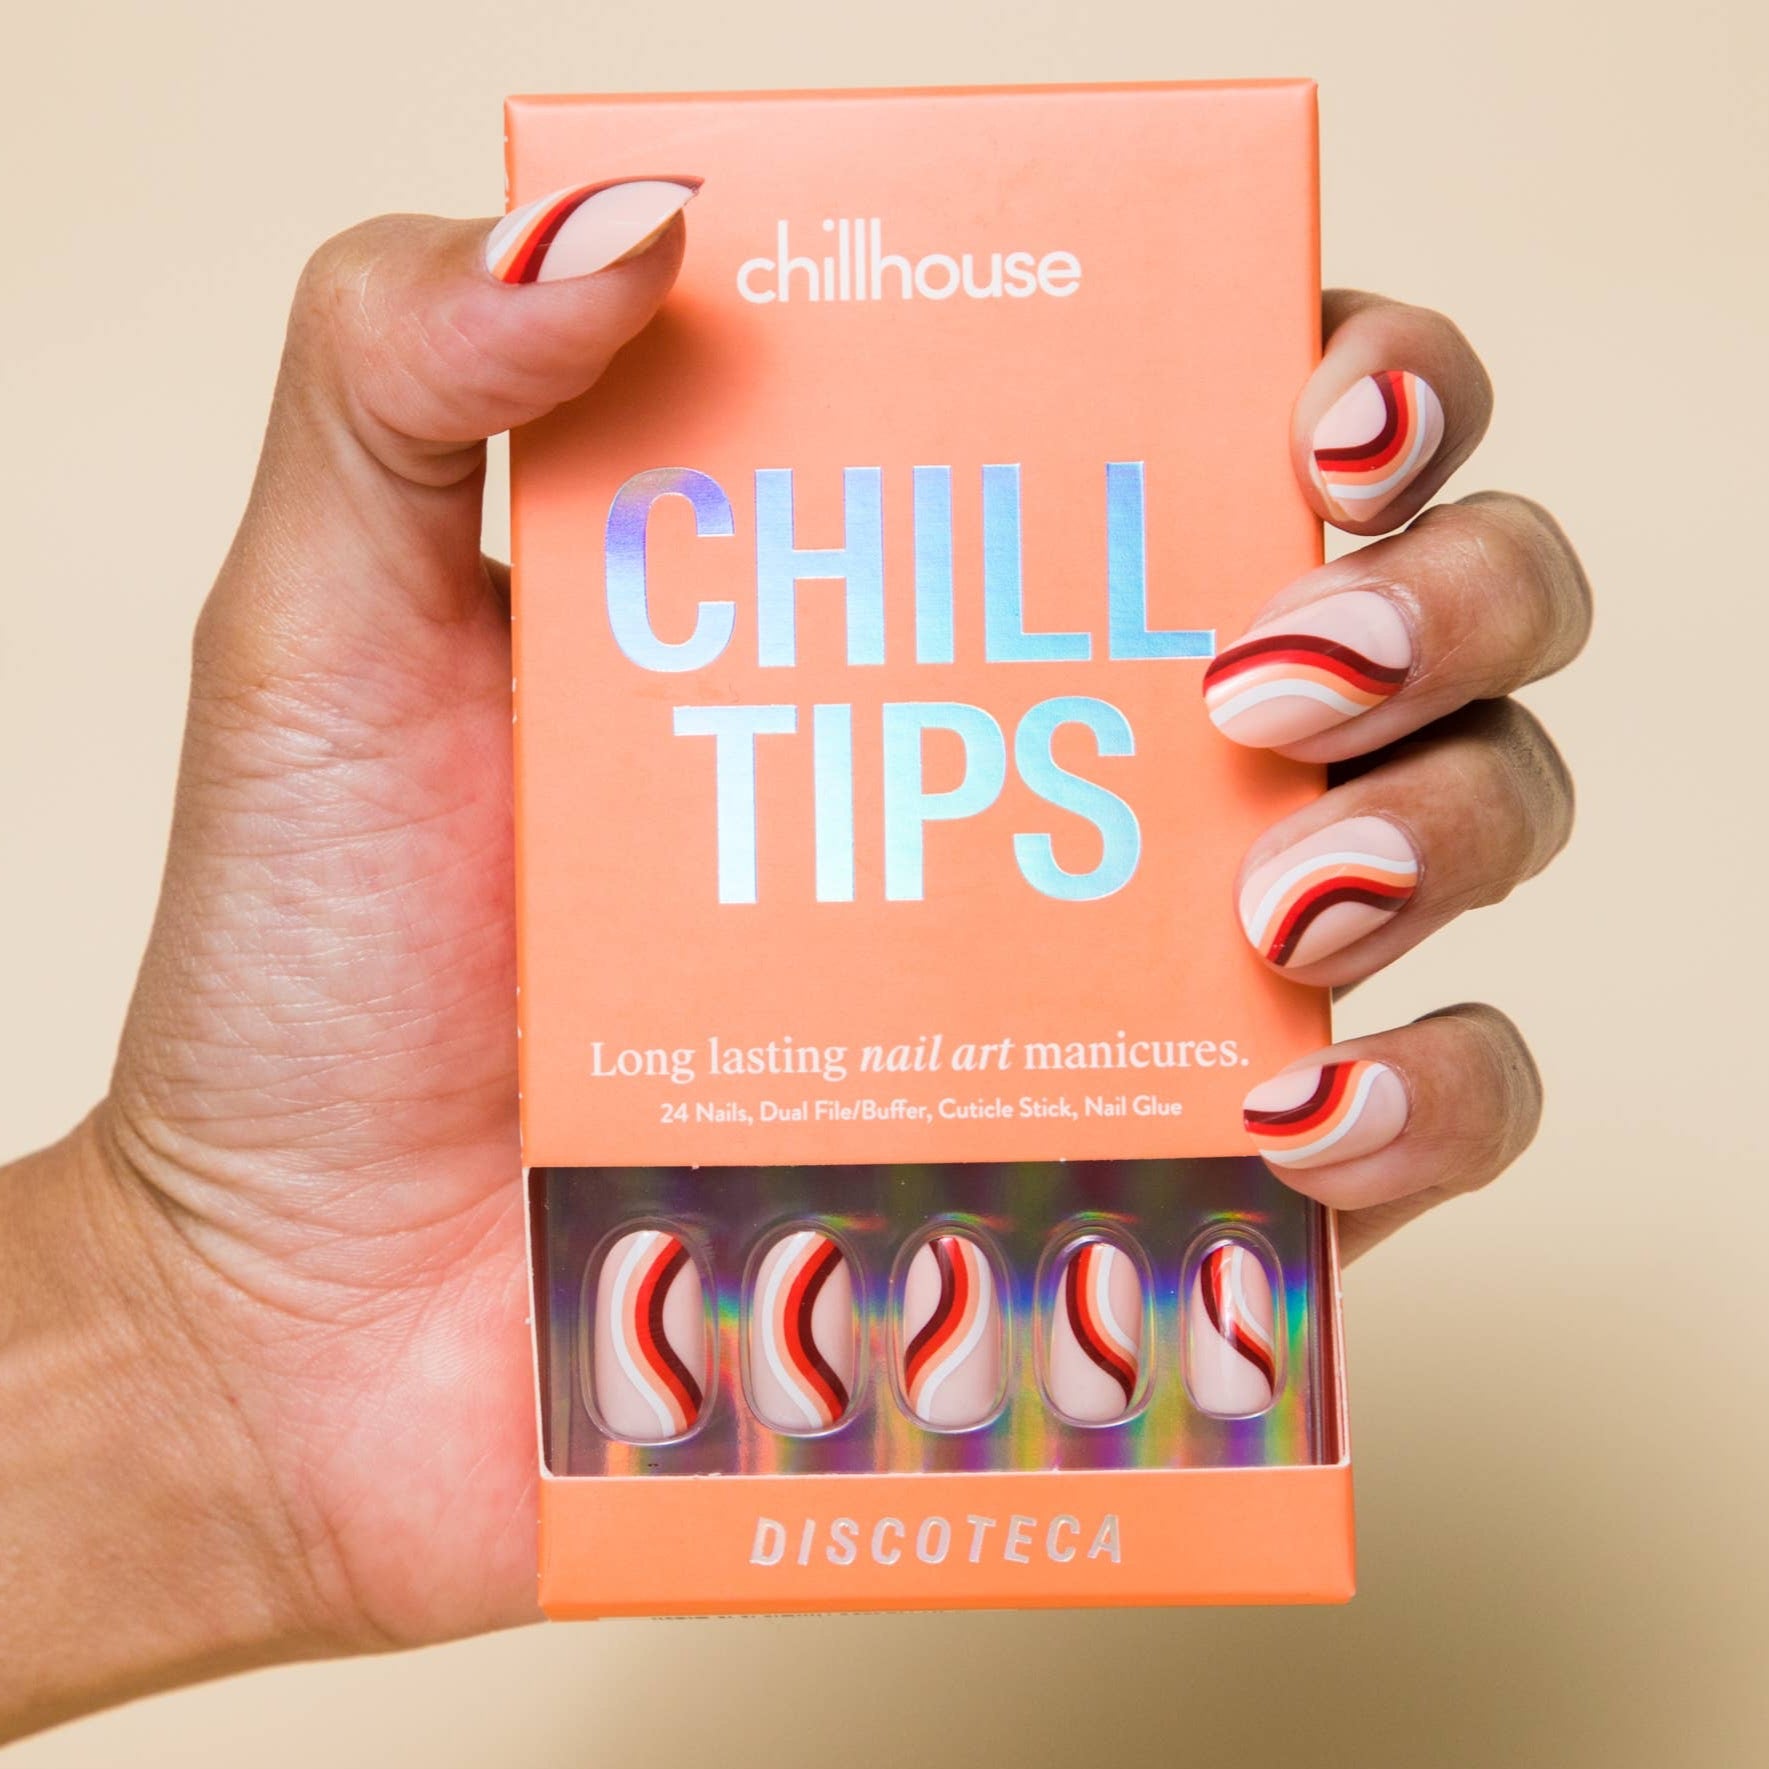 Chill Tips - Discoteca by Chillhouse